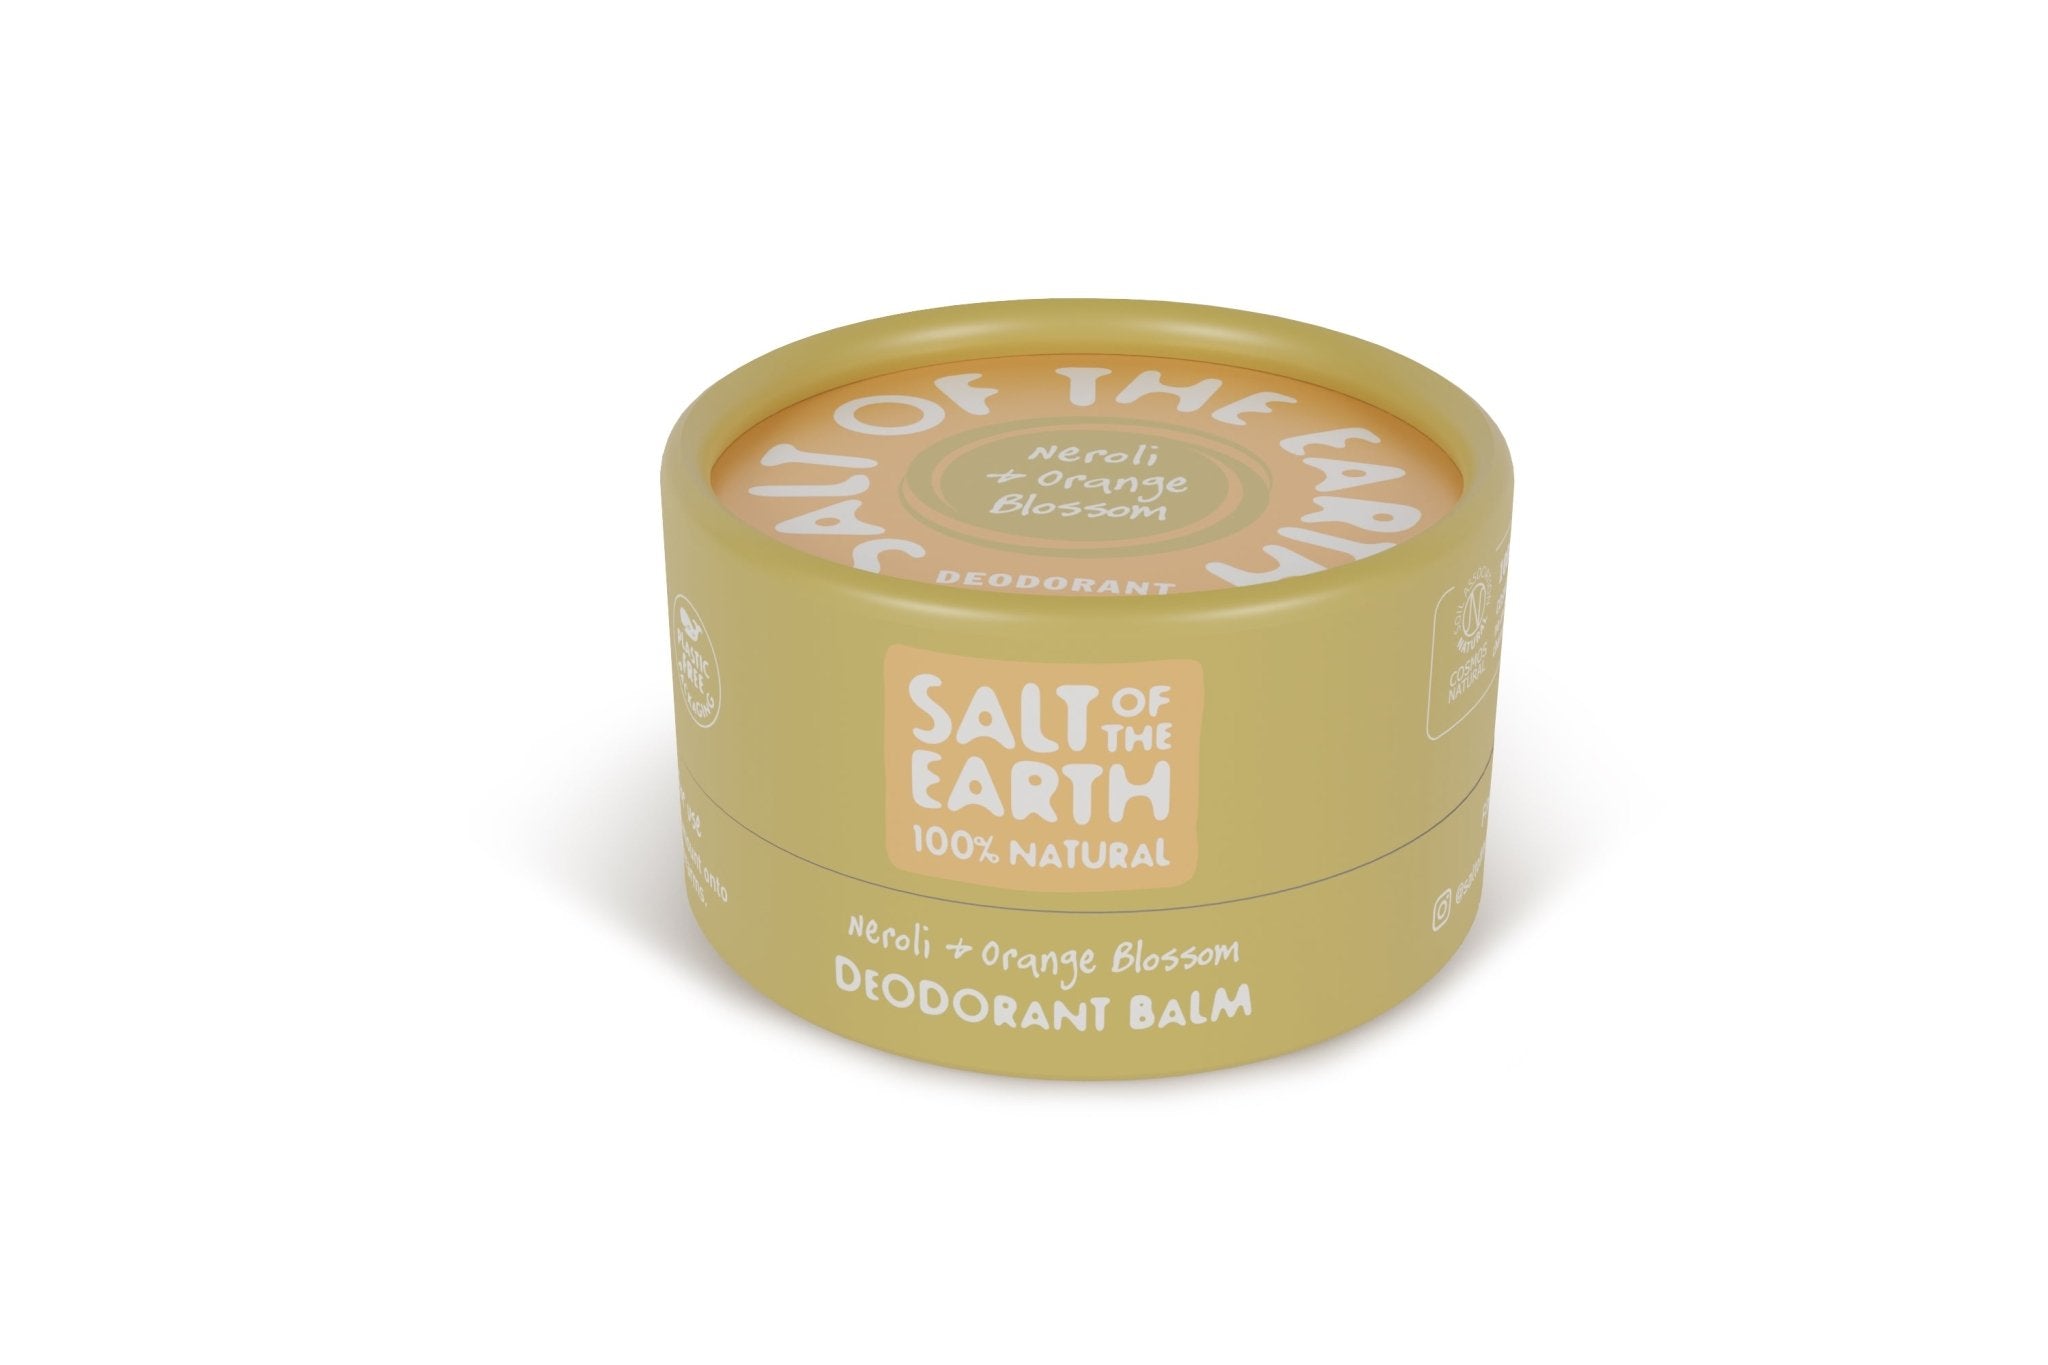 Salt of the Earth is launching two new deodorant balms - Salt of the Earth Natural Deodorants